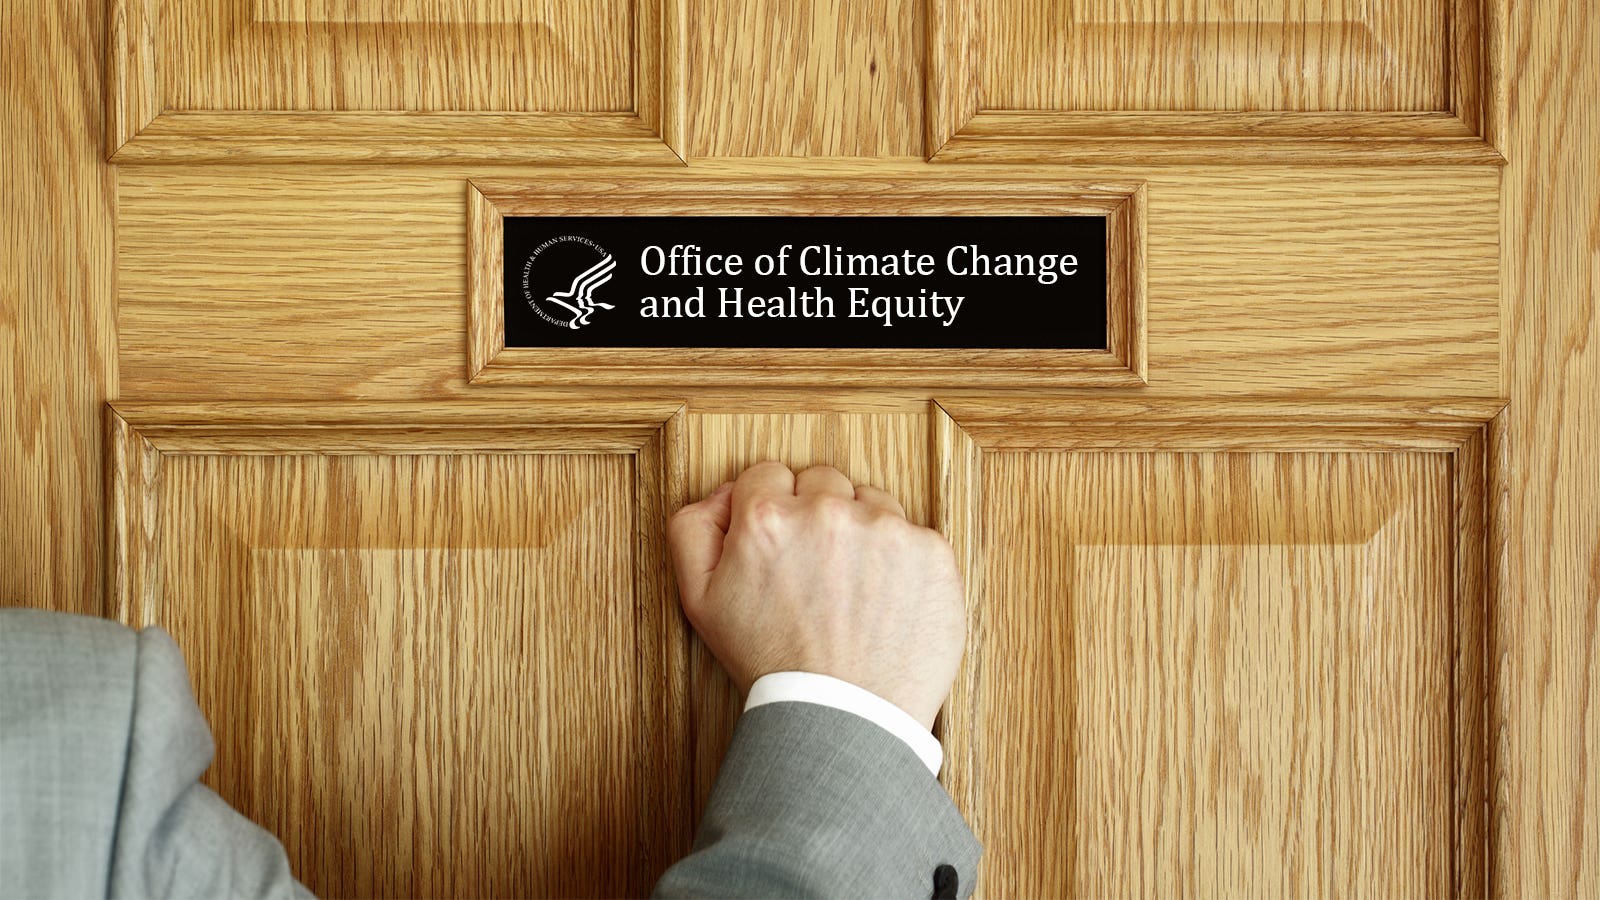 HHS’s Climate Commerce Office: No longer Open Yet, but Getting Decided Reviews